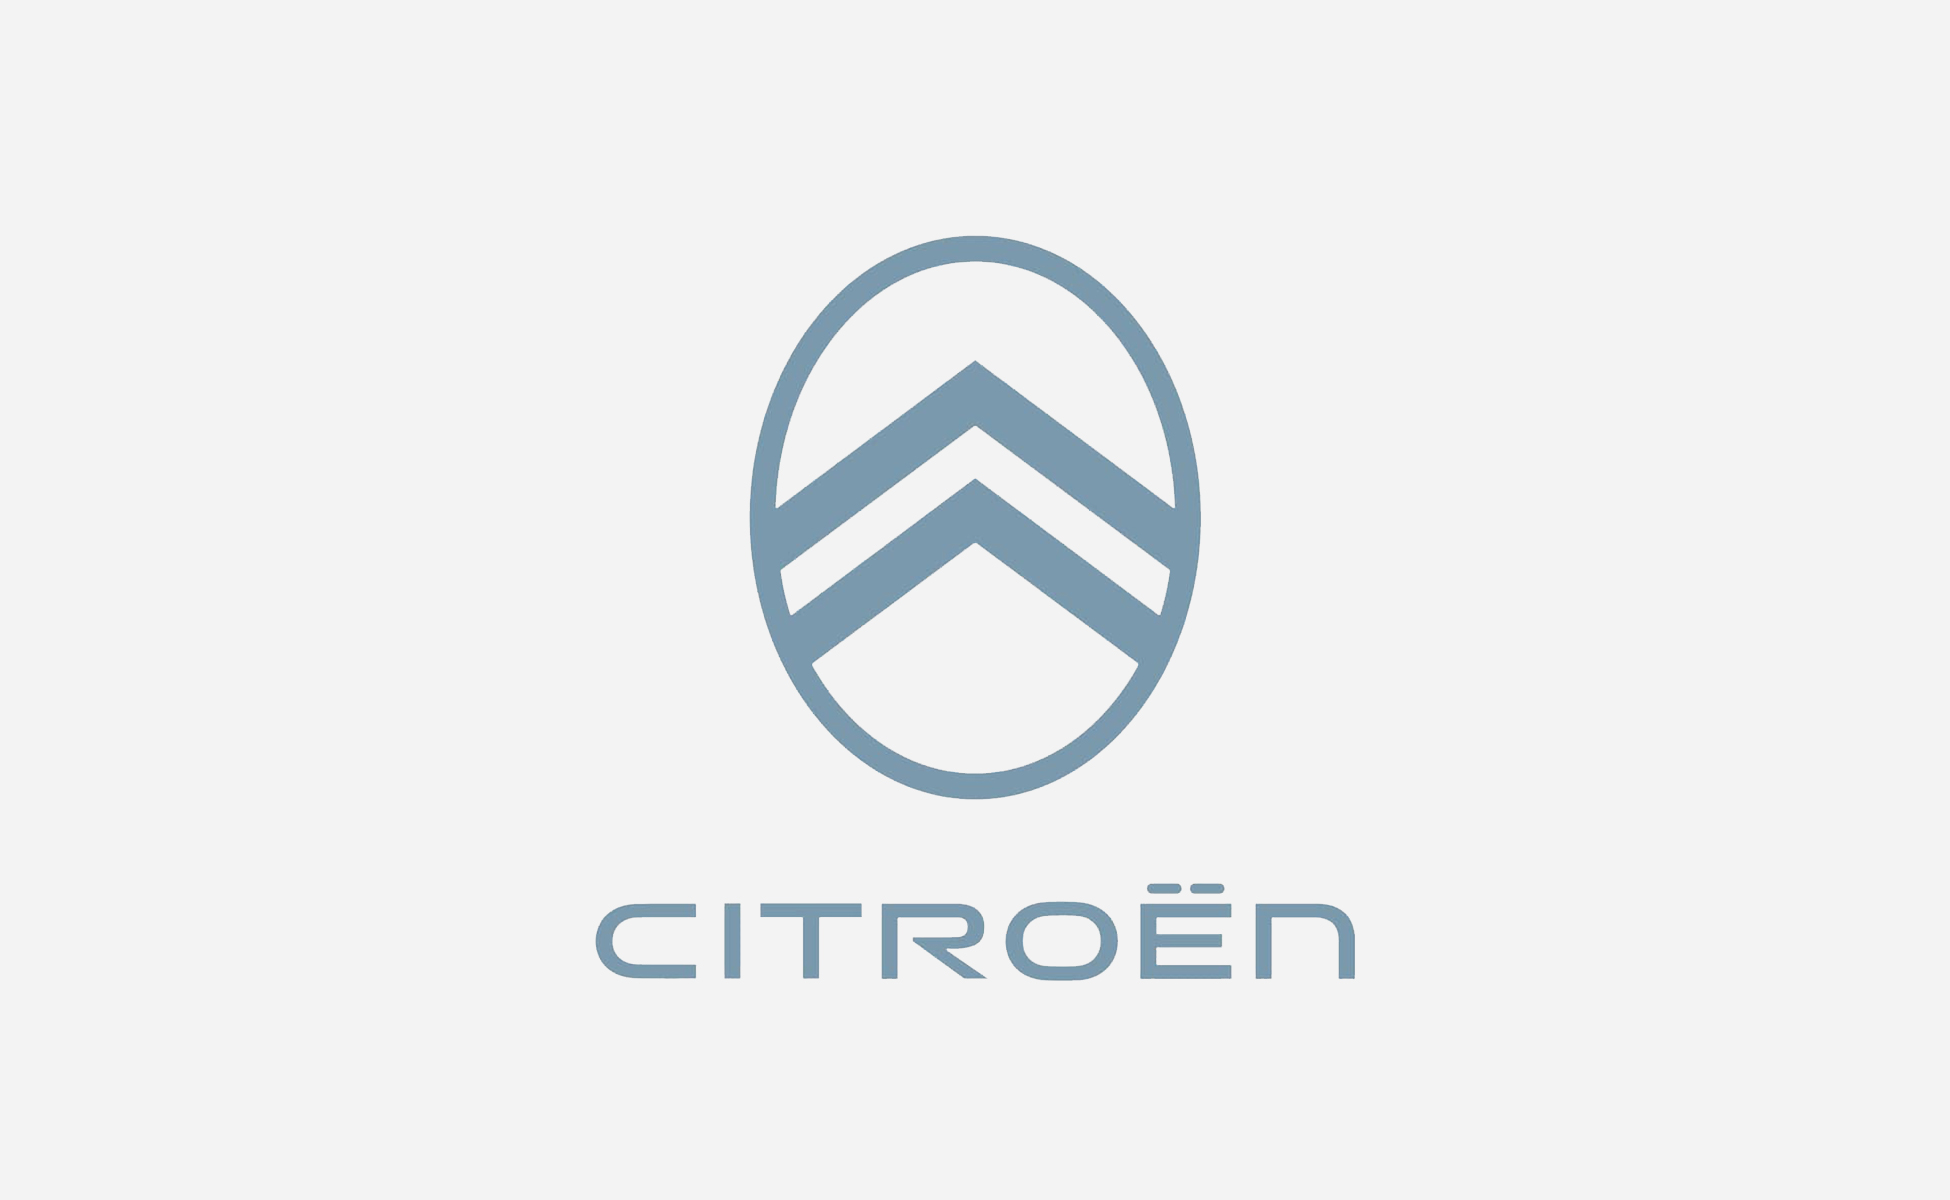 Back to the future for the new Citroën logo